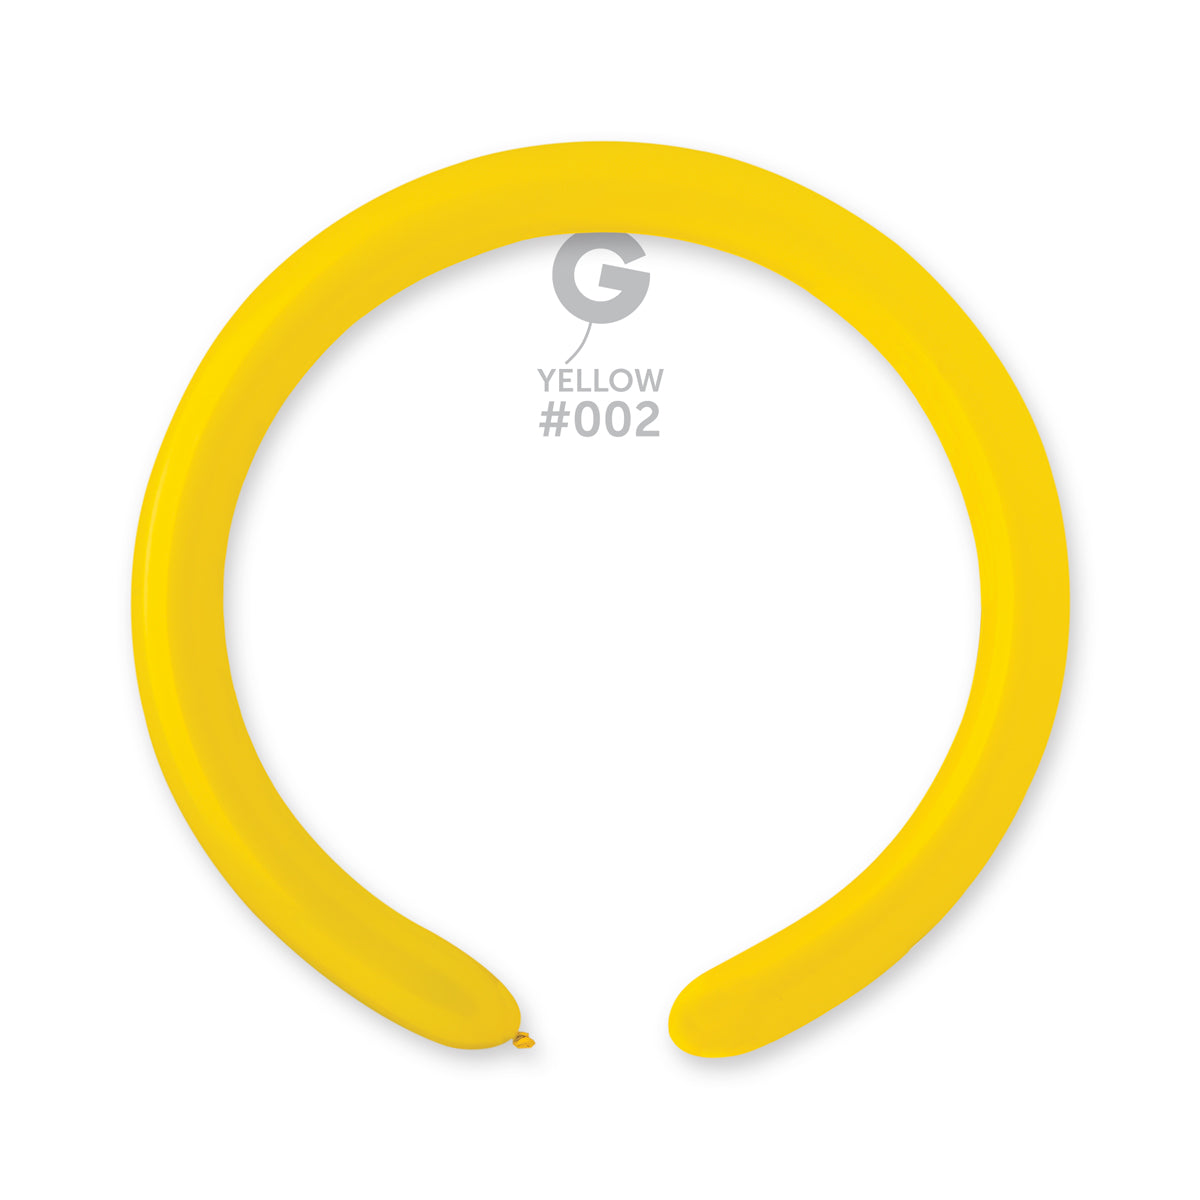 Globo Moldeable 2” D4 Amarillo "Yellow 002" 100uds